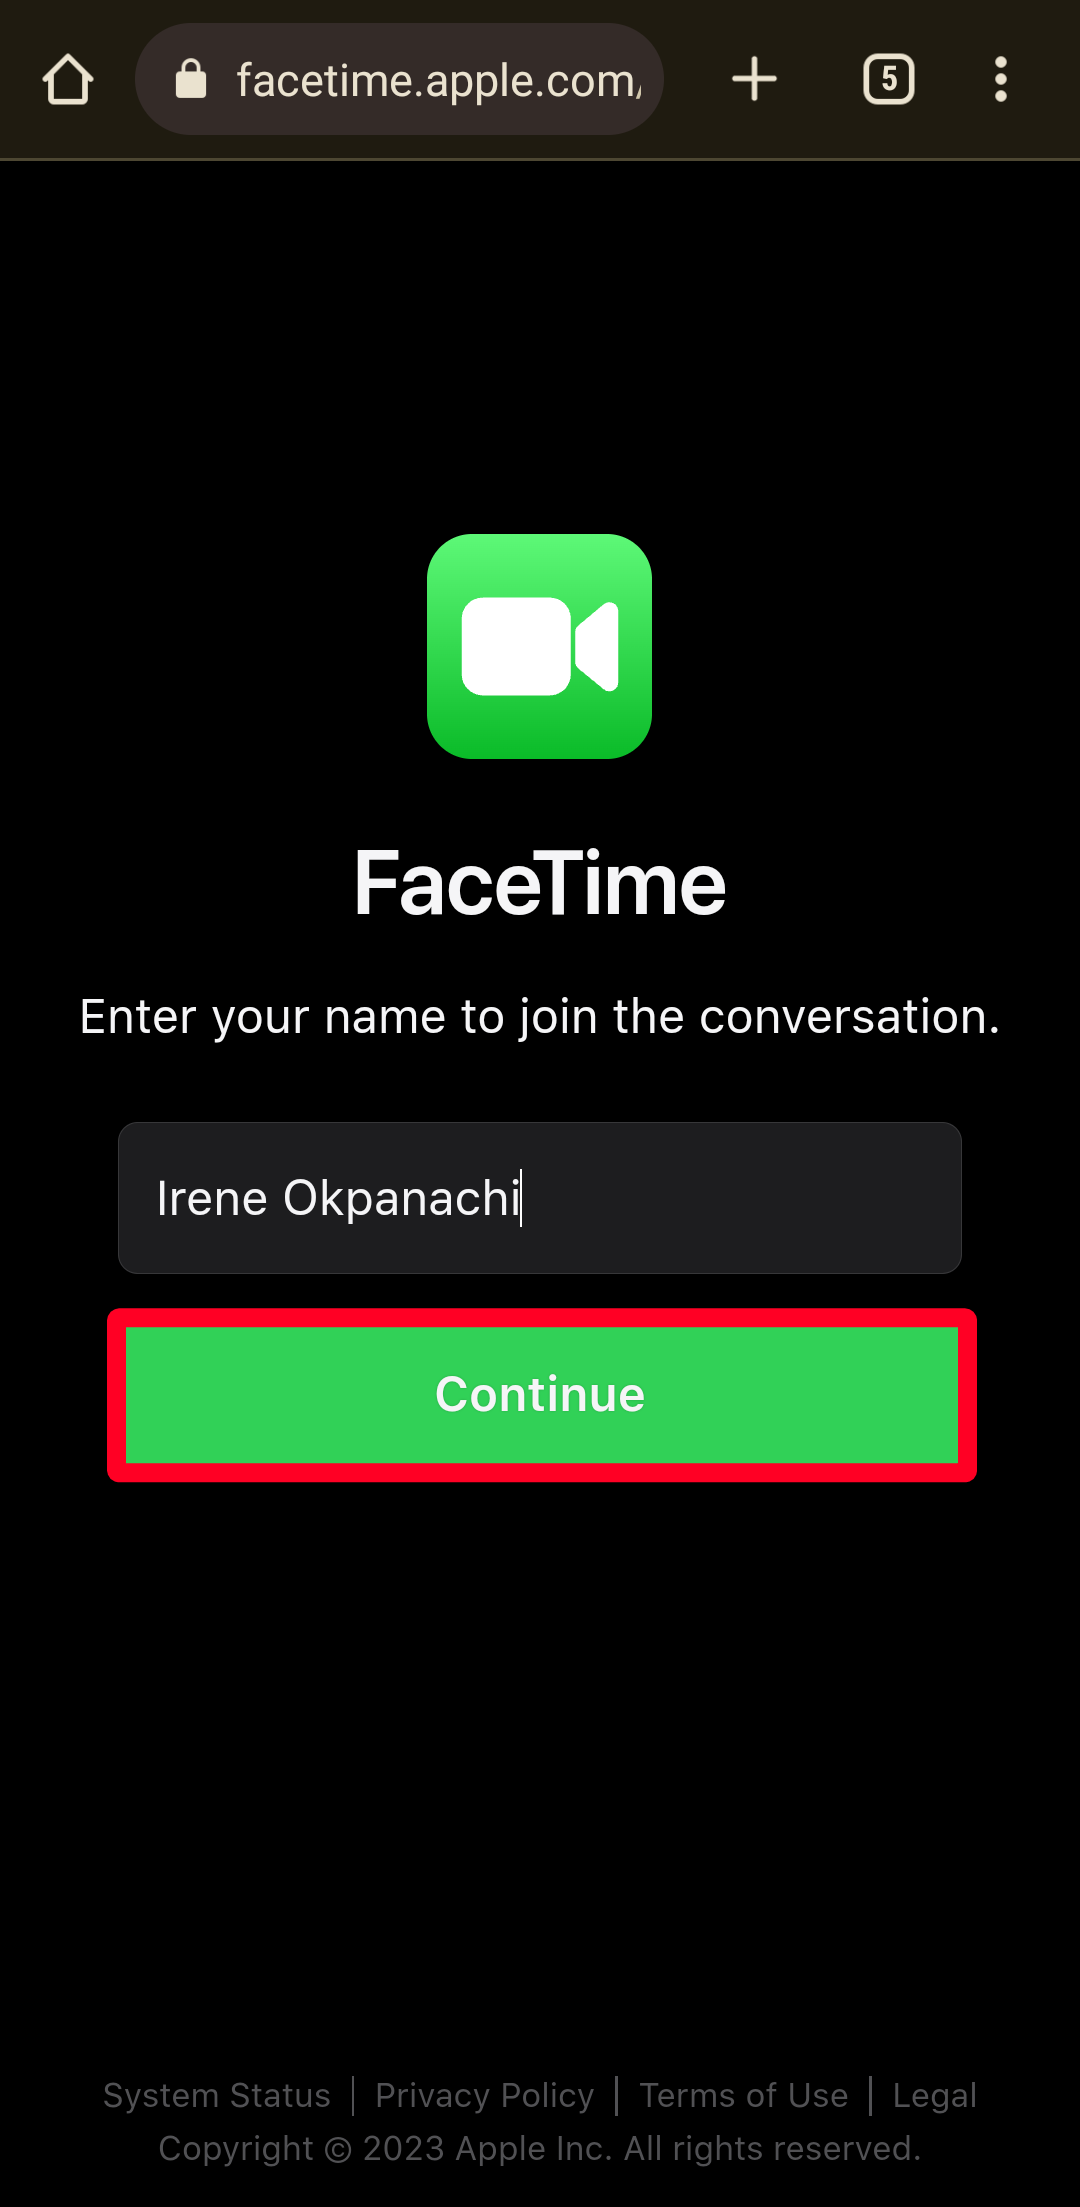 red rectangle outline over green continue button under enter your name to join the conversion in FaceTime app